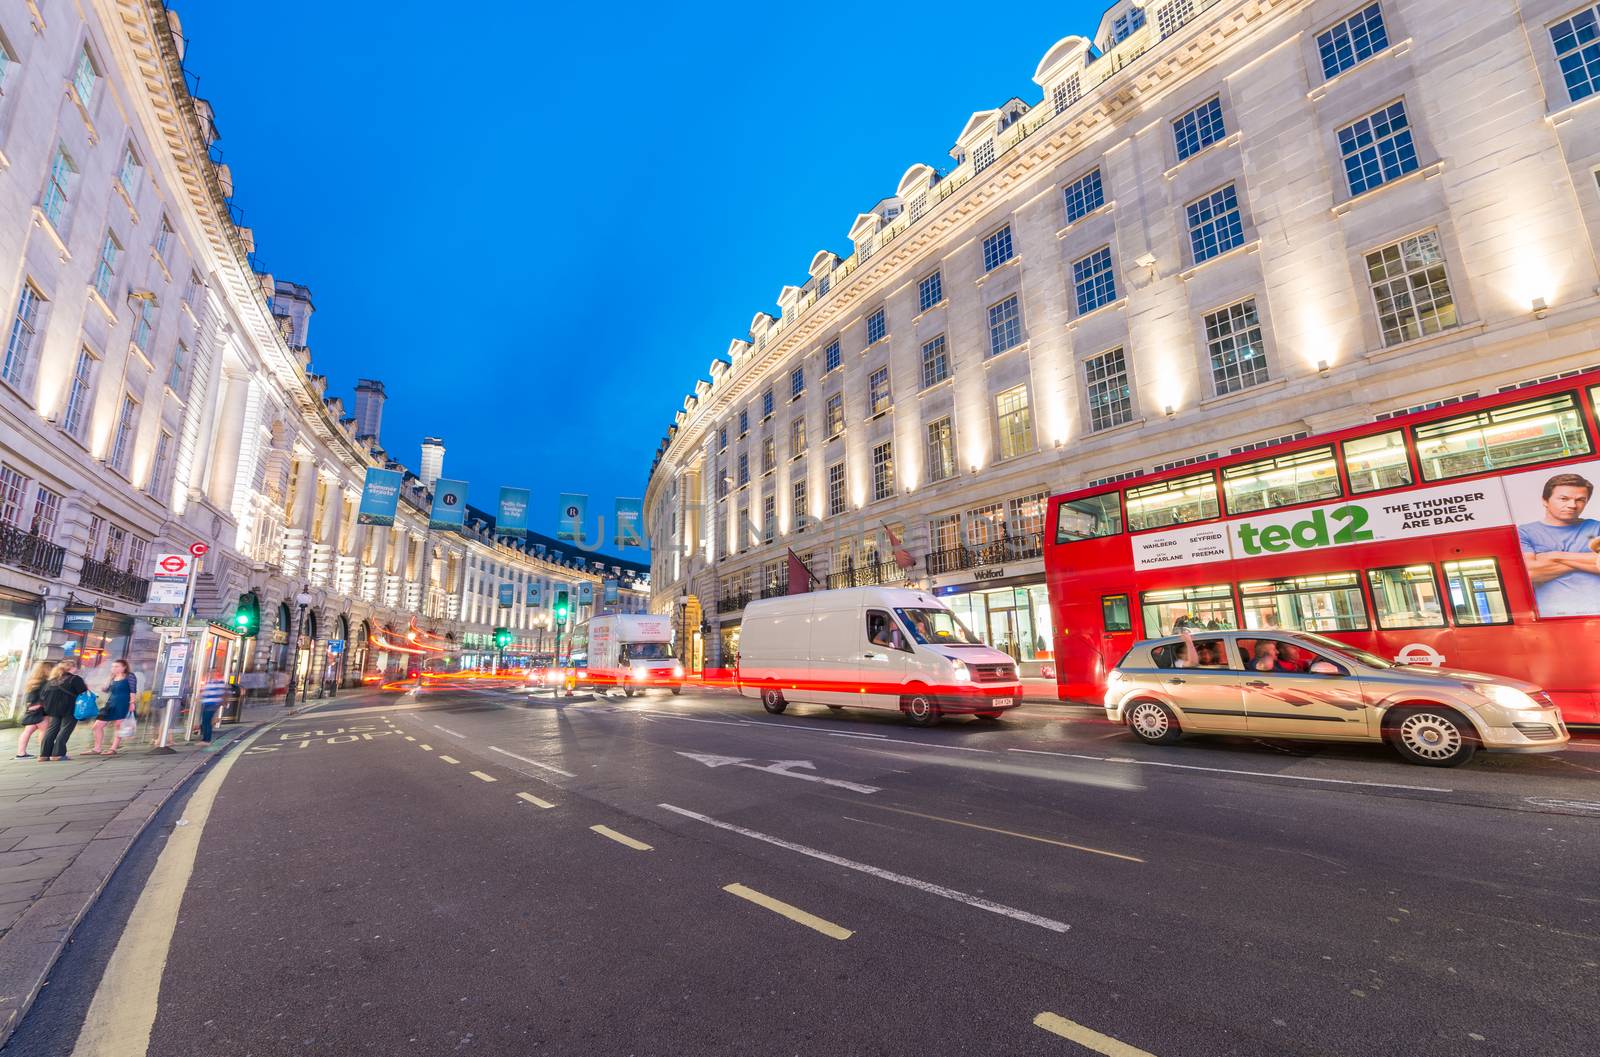 LONDON - JUNE 15, 2015: Buses and traffic in Regent Street at ni by jovannig